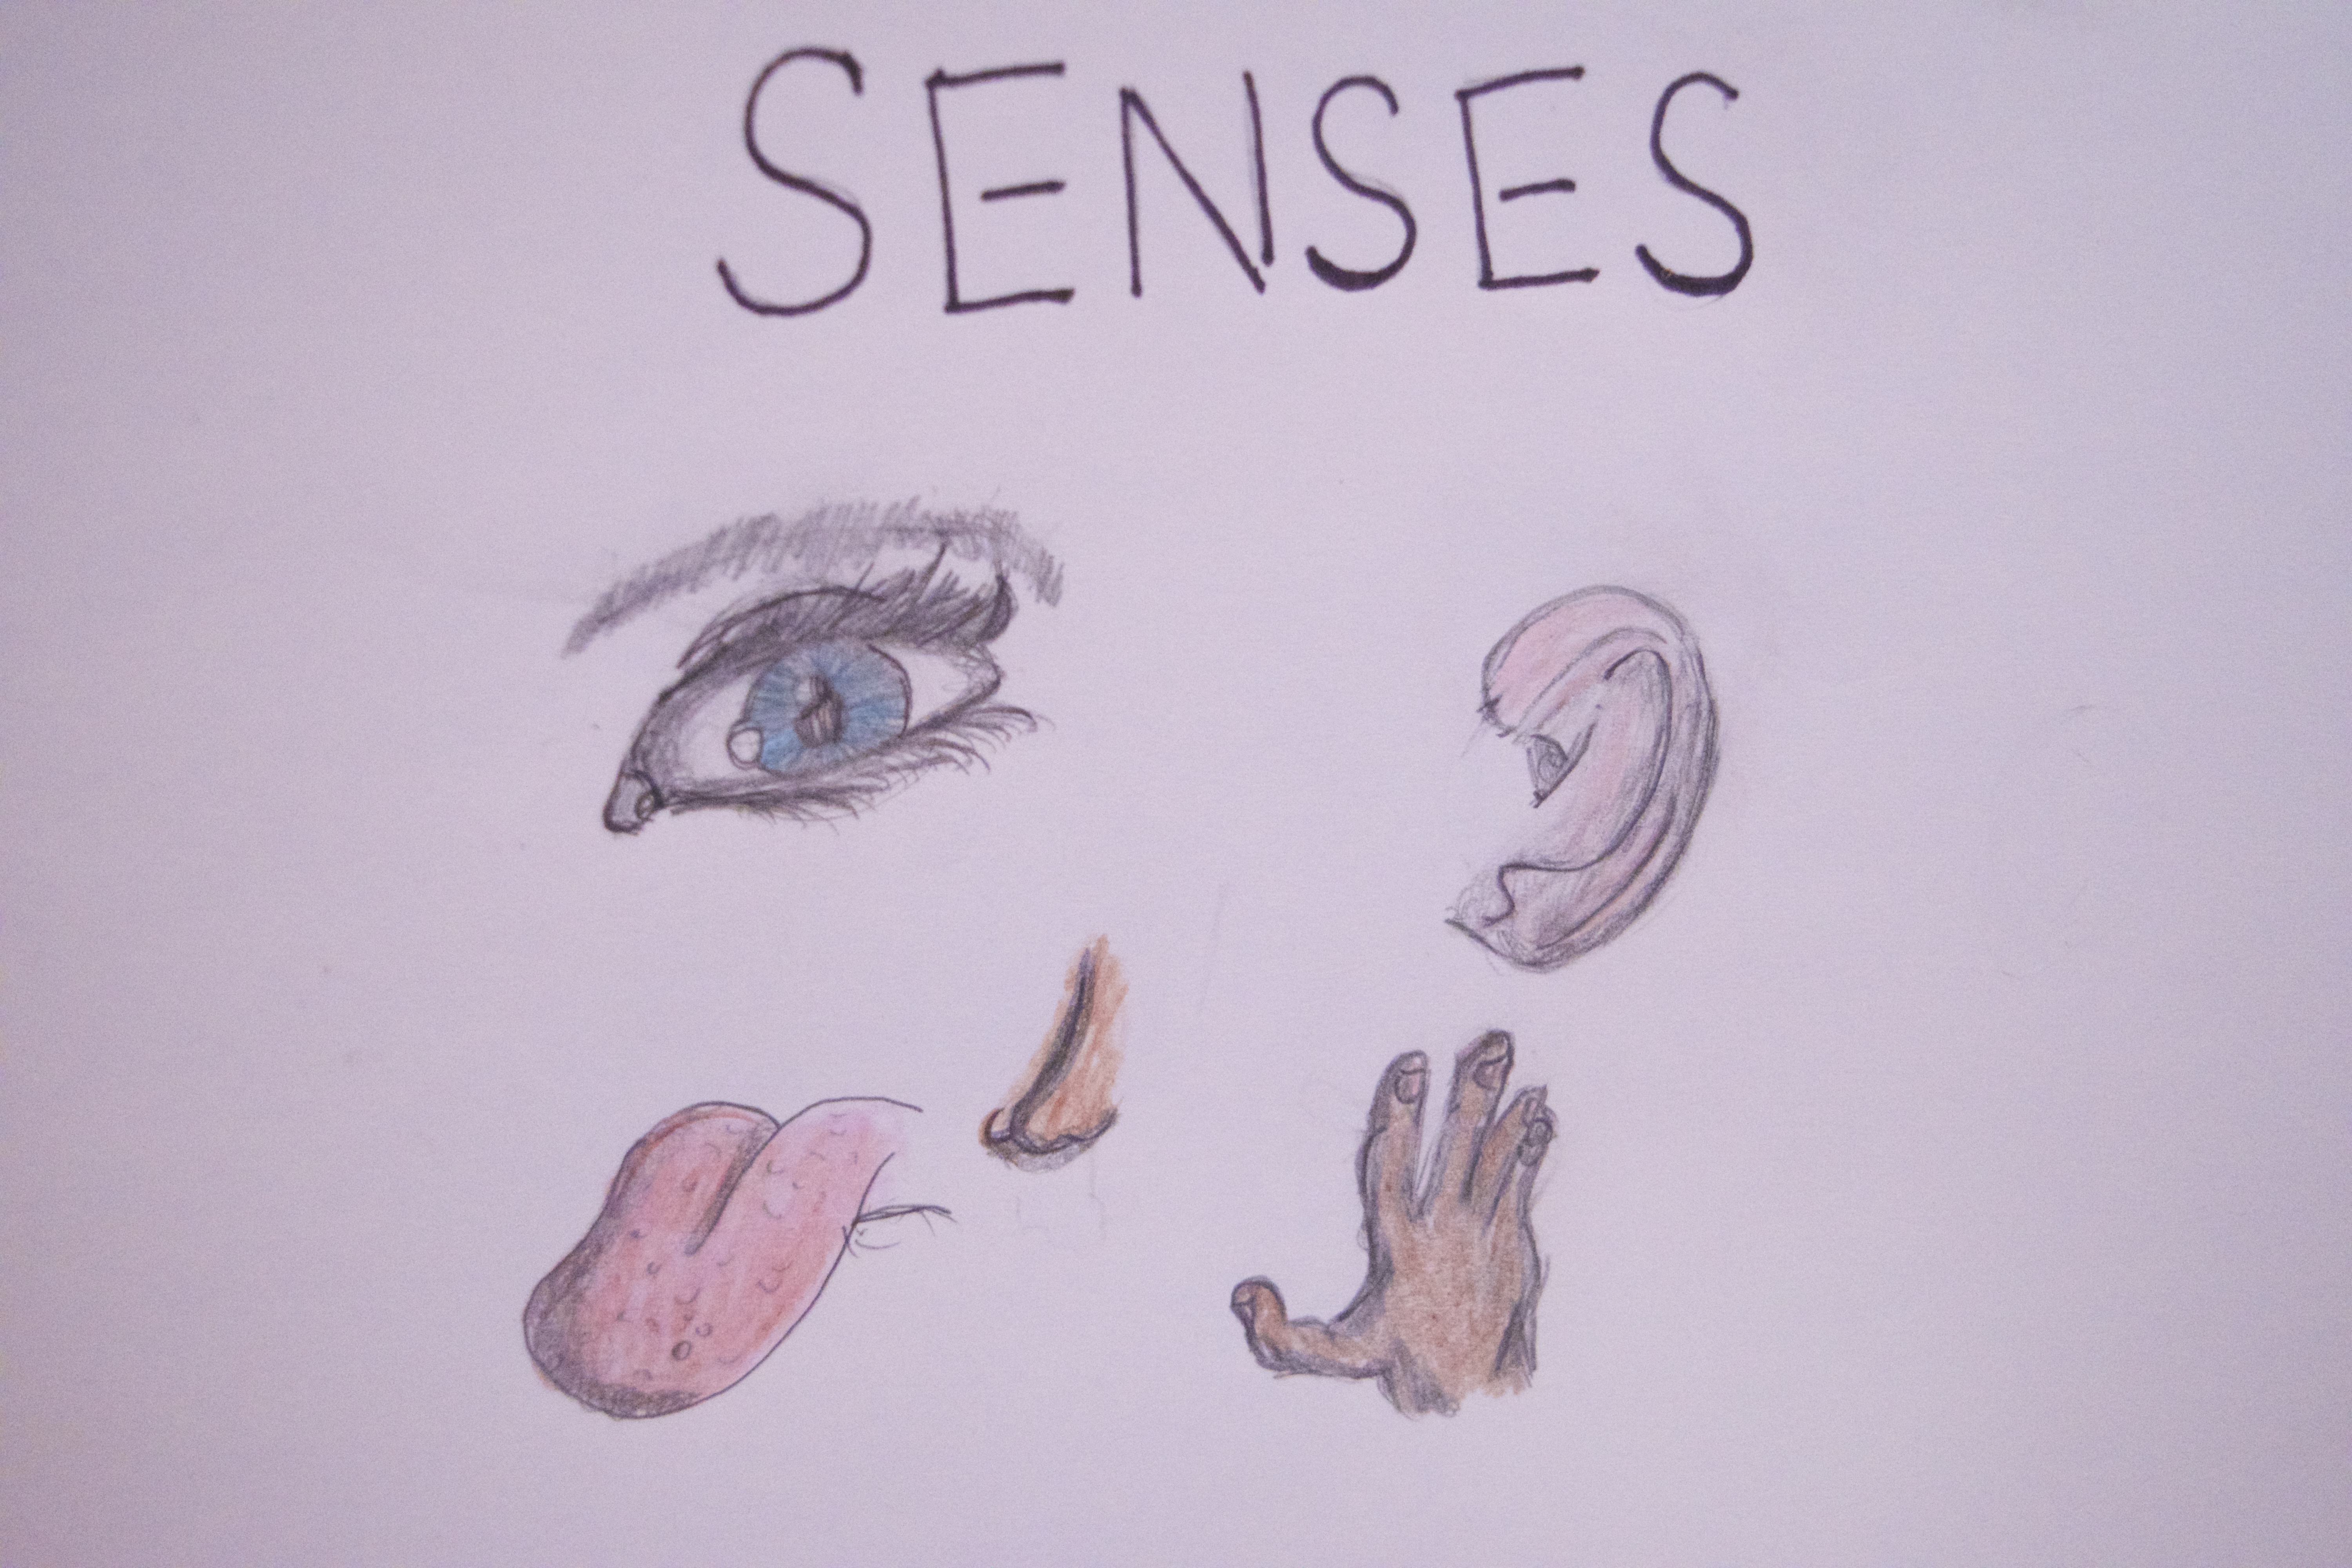 9-yr-old sketches of the senses